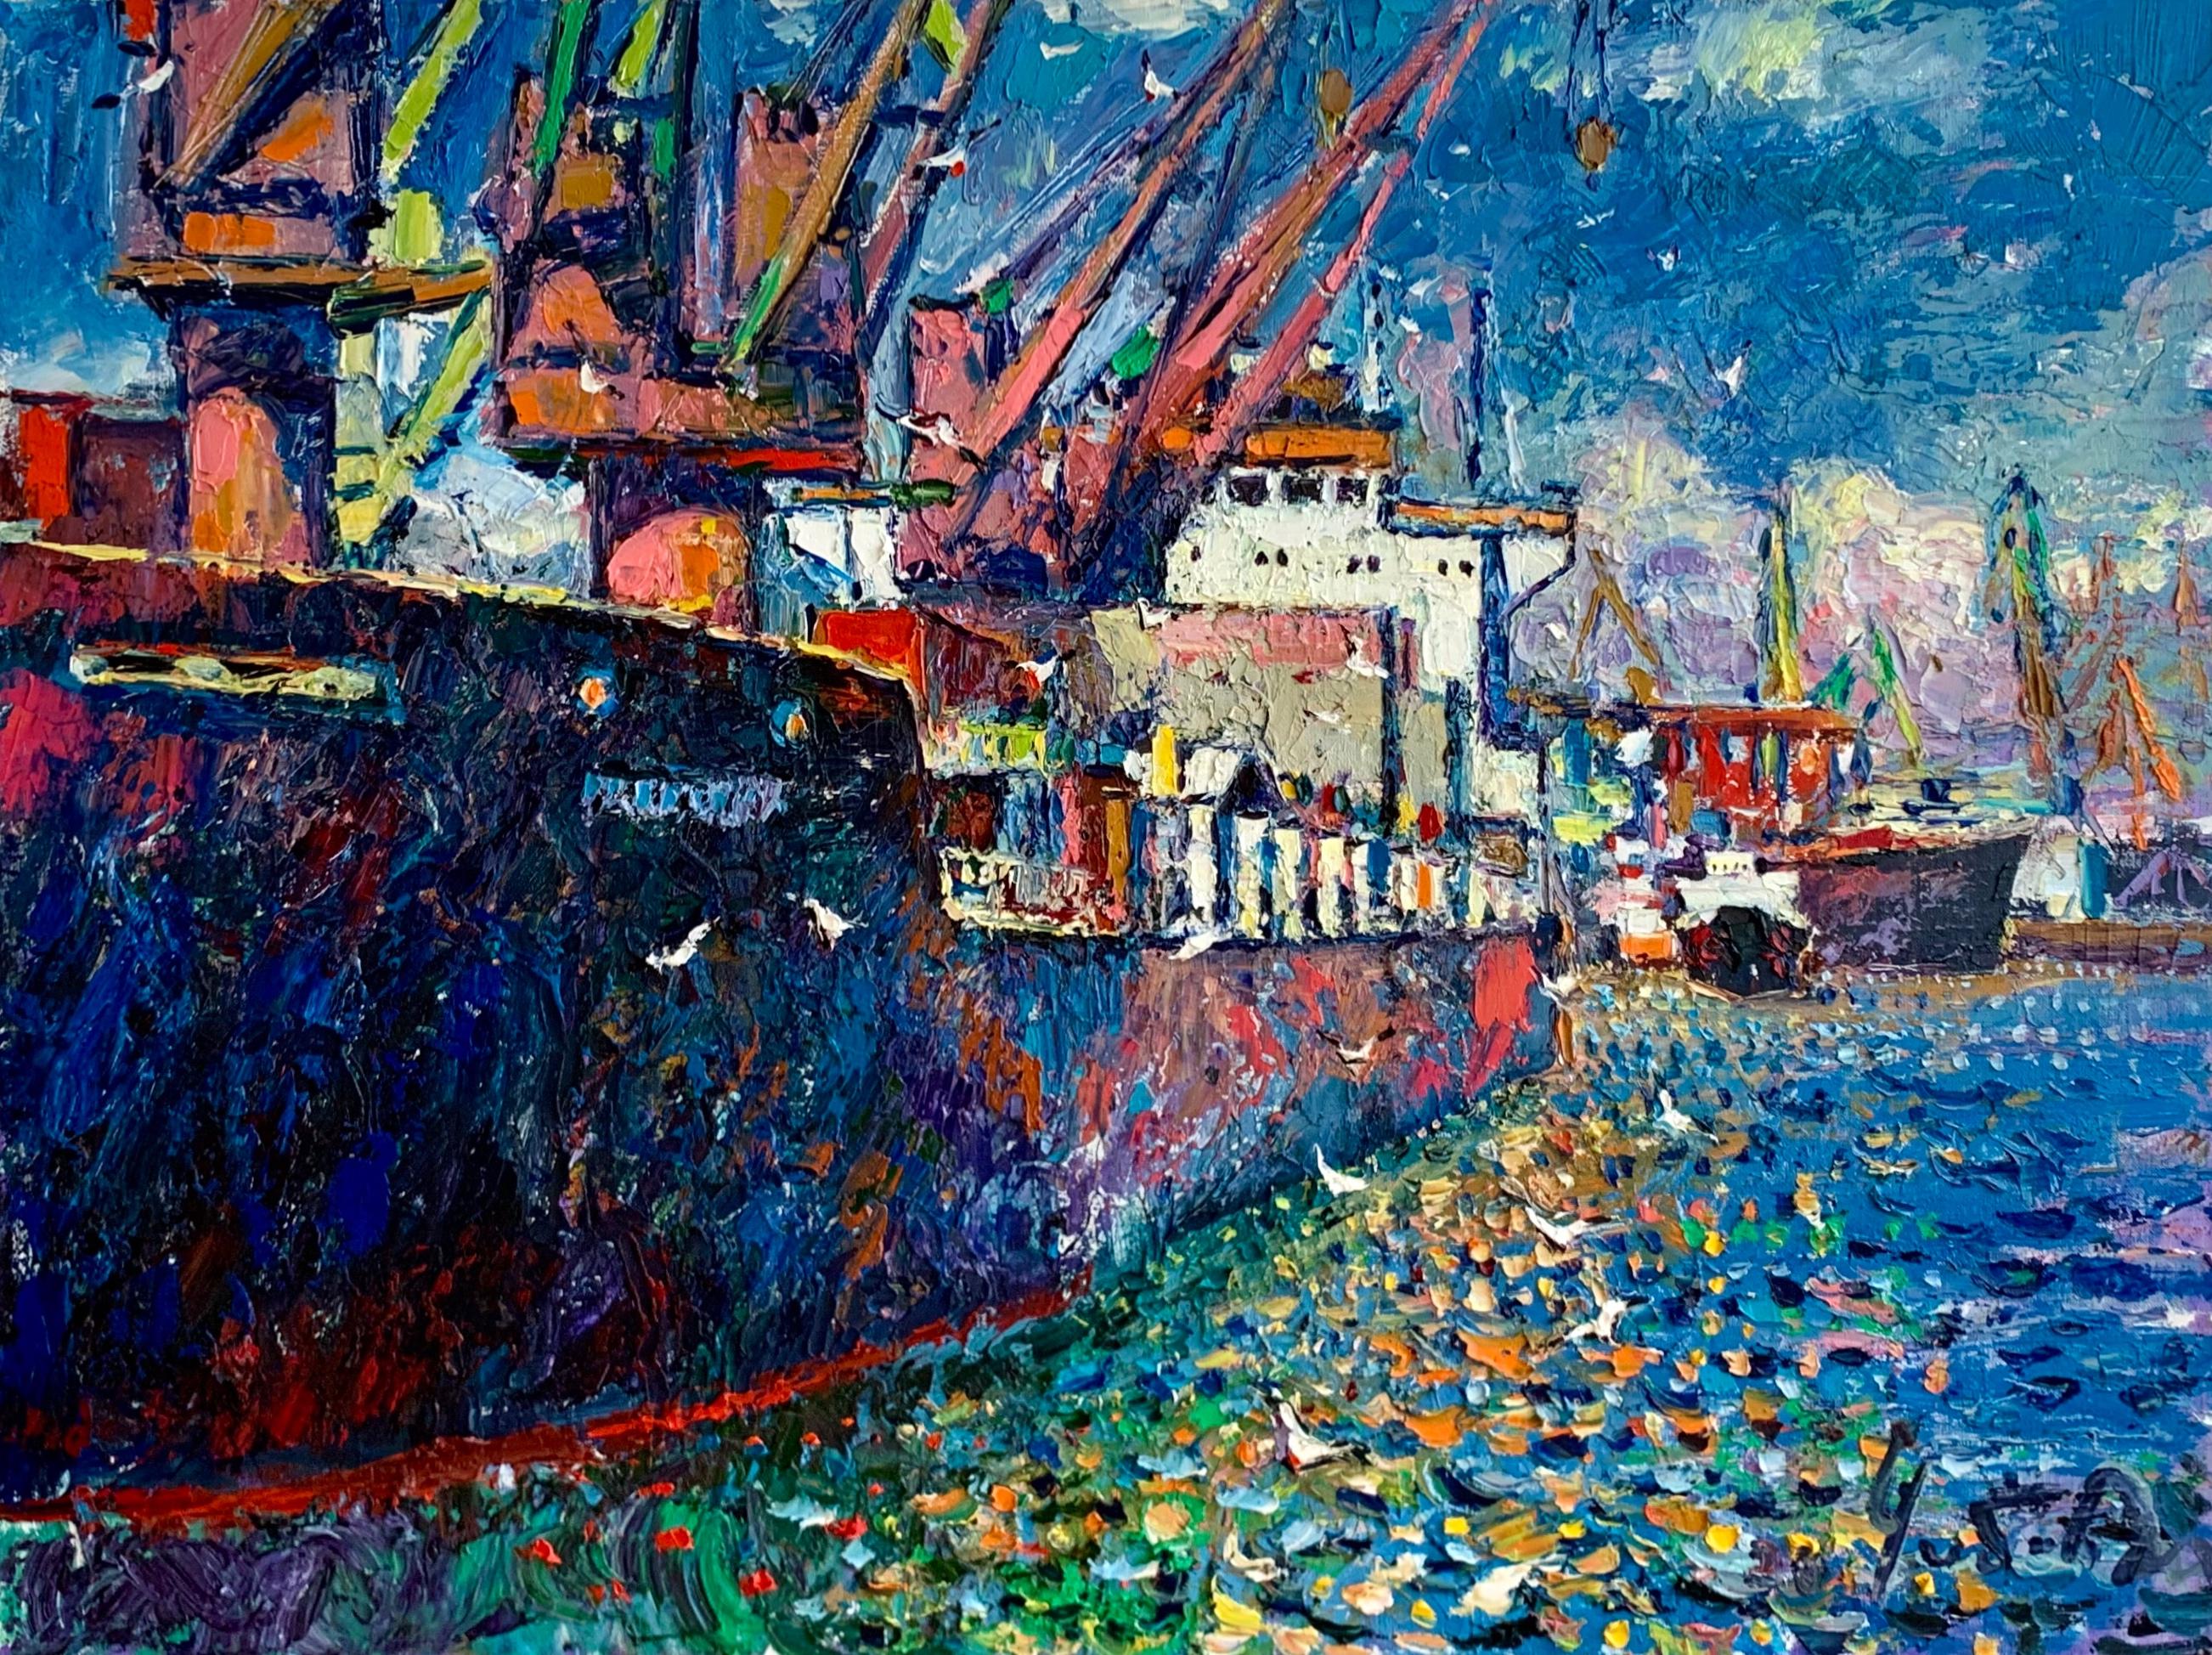 Chebotaru Andrey Figurative Painting - Modern Industrial Art Sea Port Landscape Oil Canvas Painting by Chebotaru A.